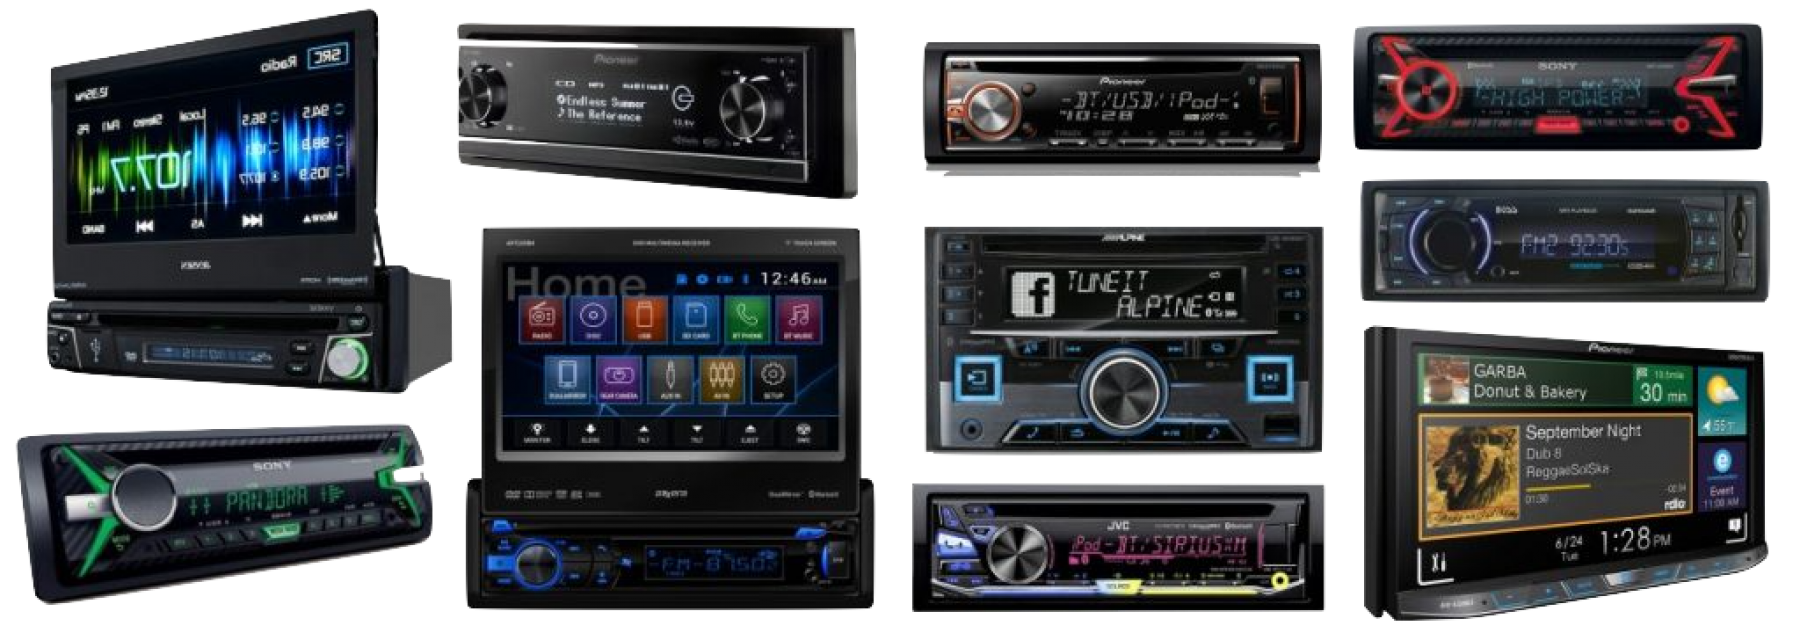 Universal 2DIN Car Mp3/ MP5 Player with Touch Screen and FM Radio